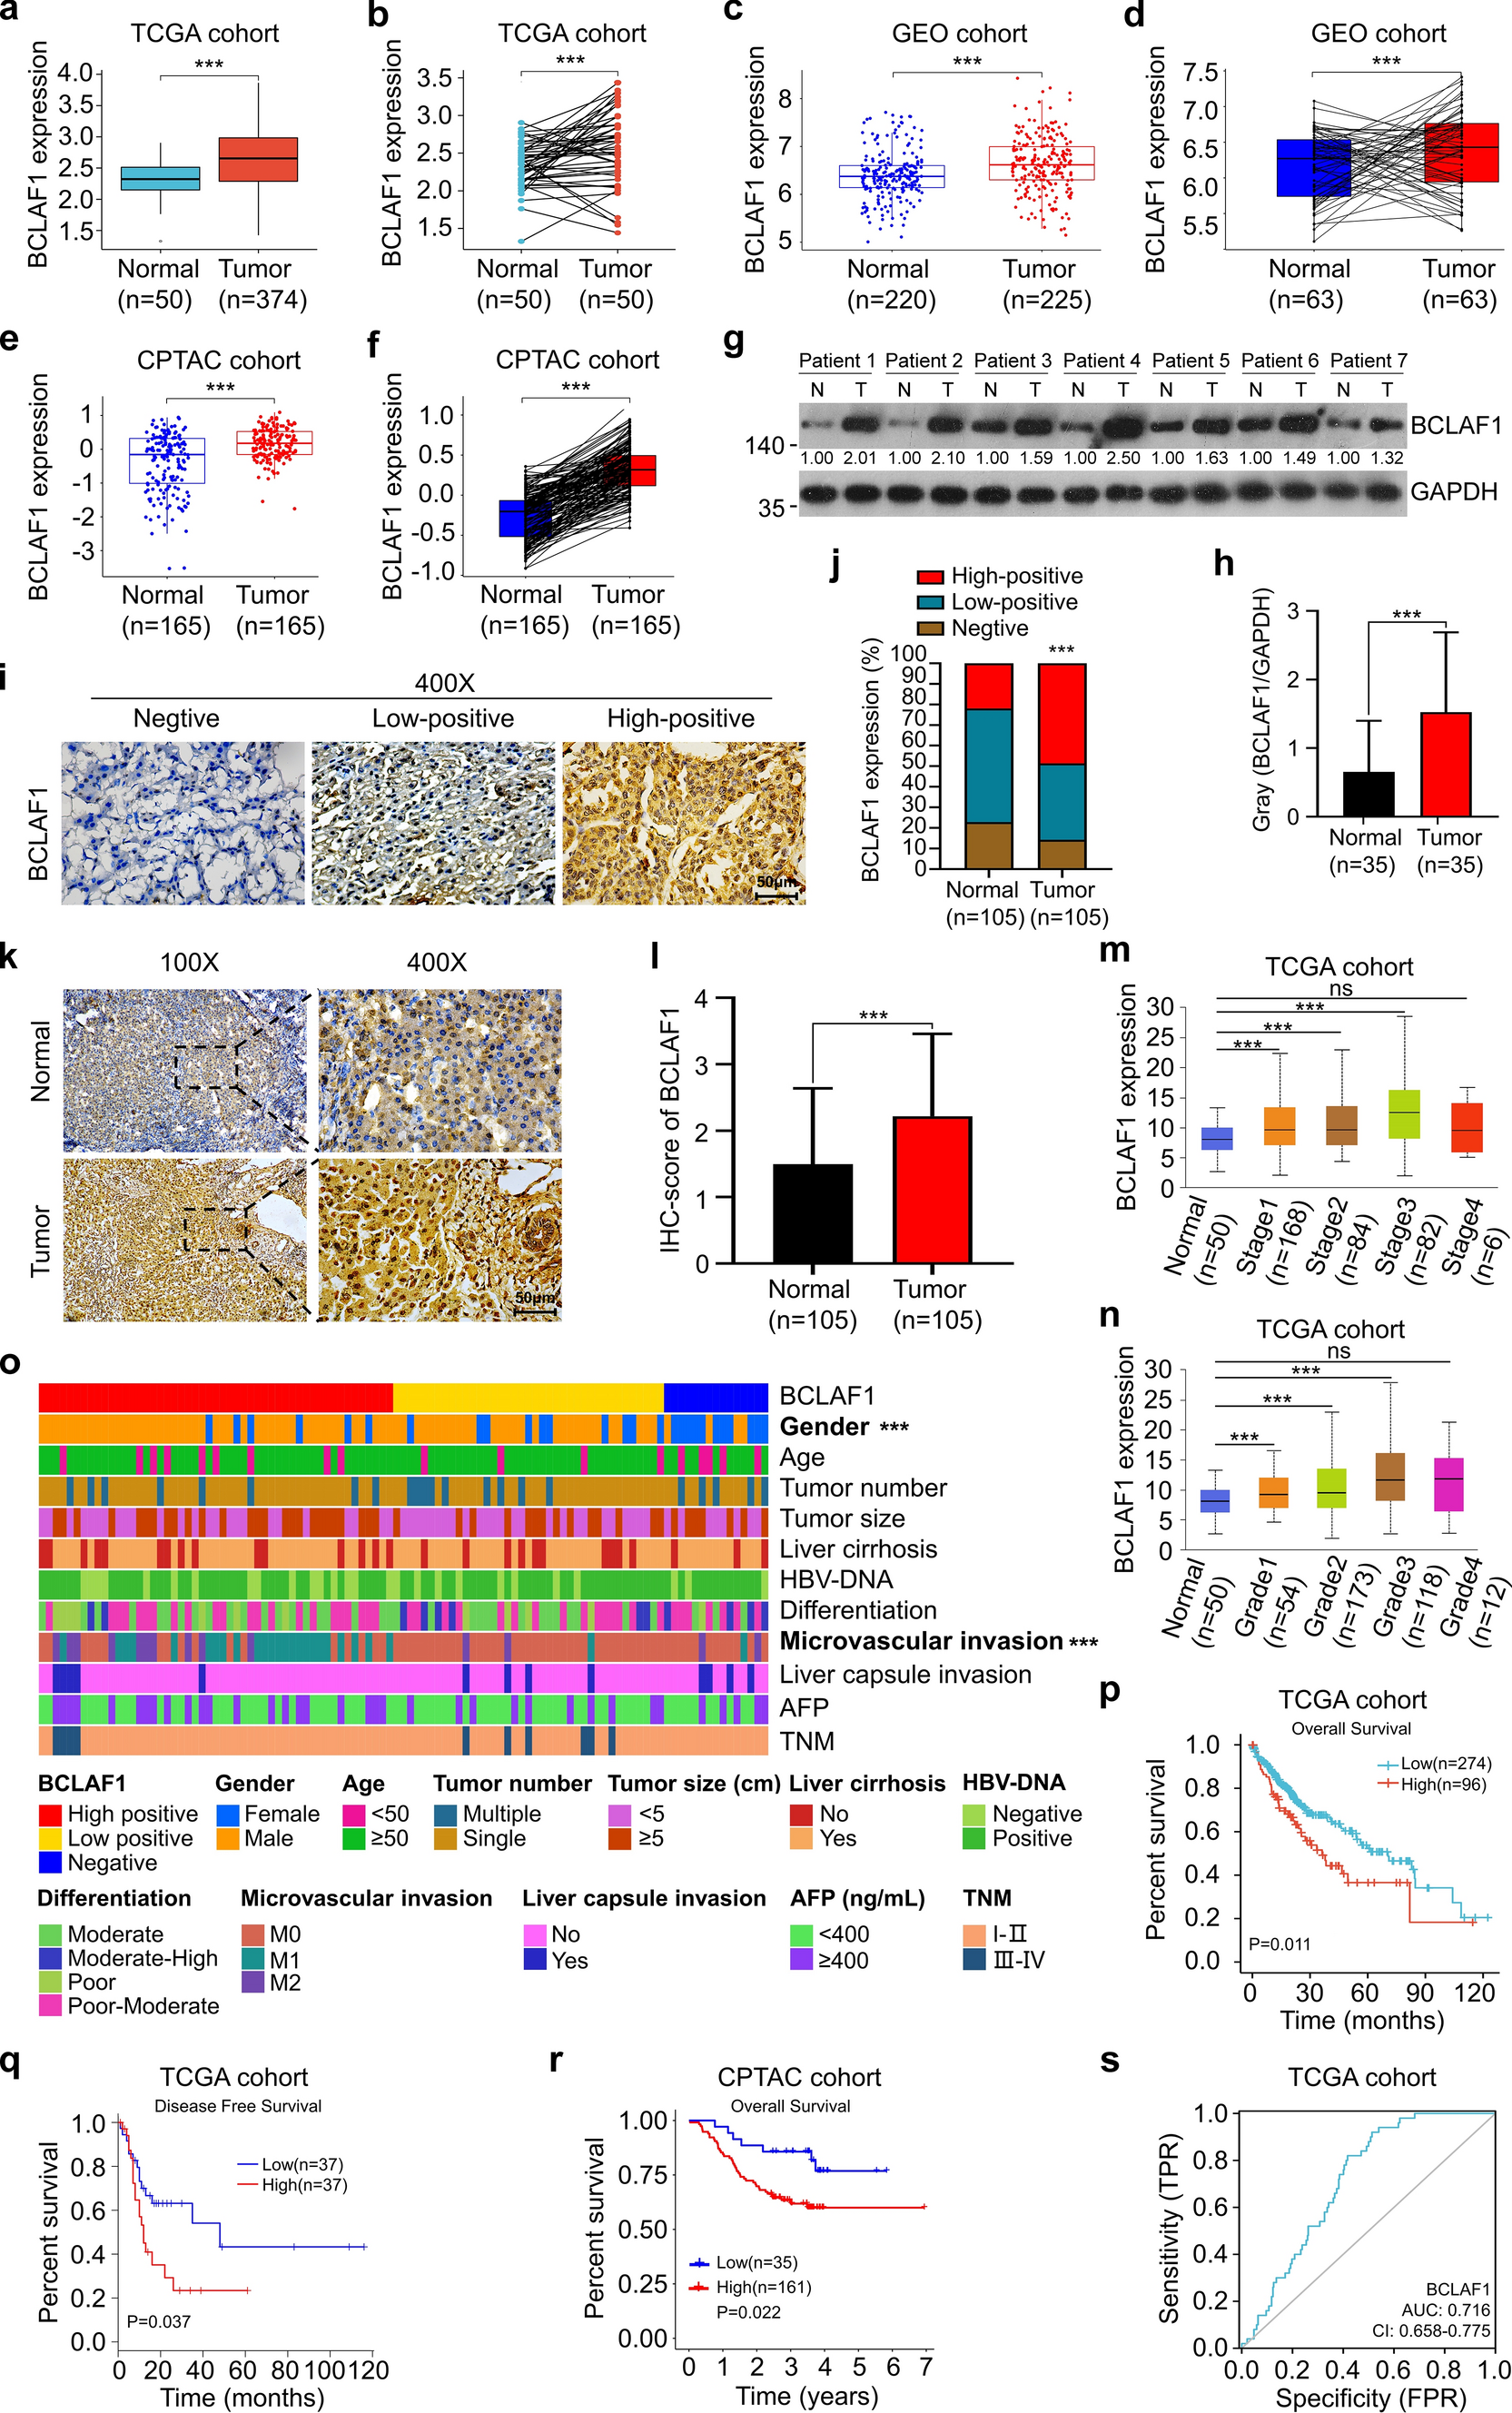 BCLAF1 binds SPOP to stabilize PD-L1 and promotes the development and immune escape of hepatocellular carcinoma